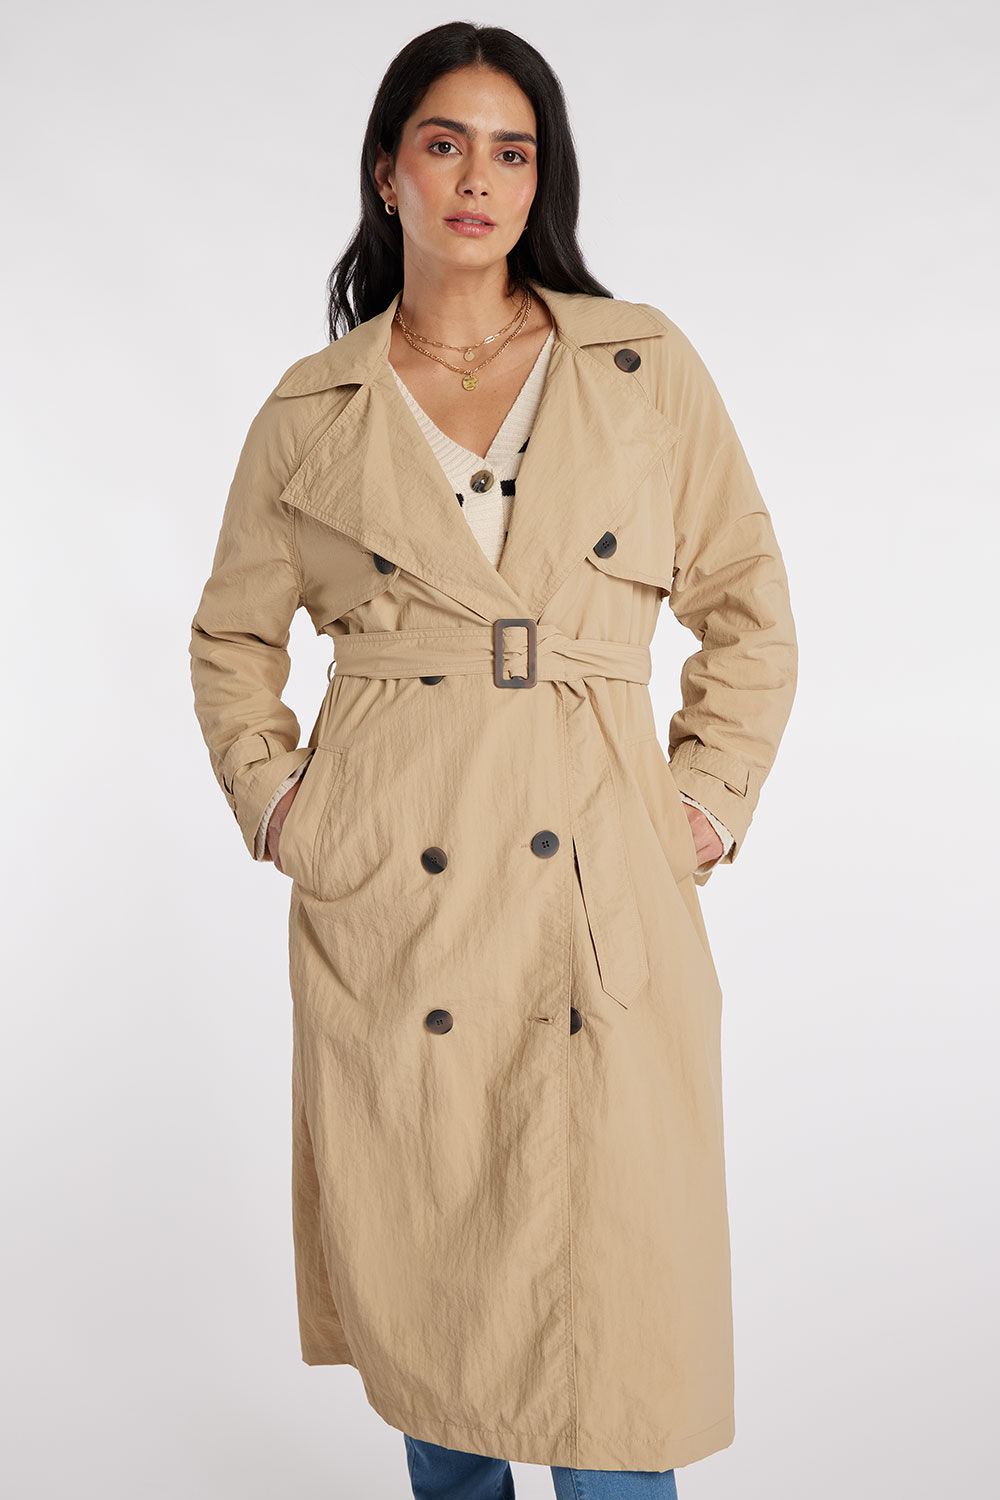 Brave Soul Tan - Trench Style Coat, Size: 12